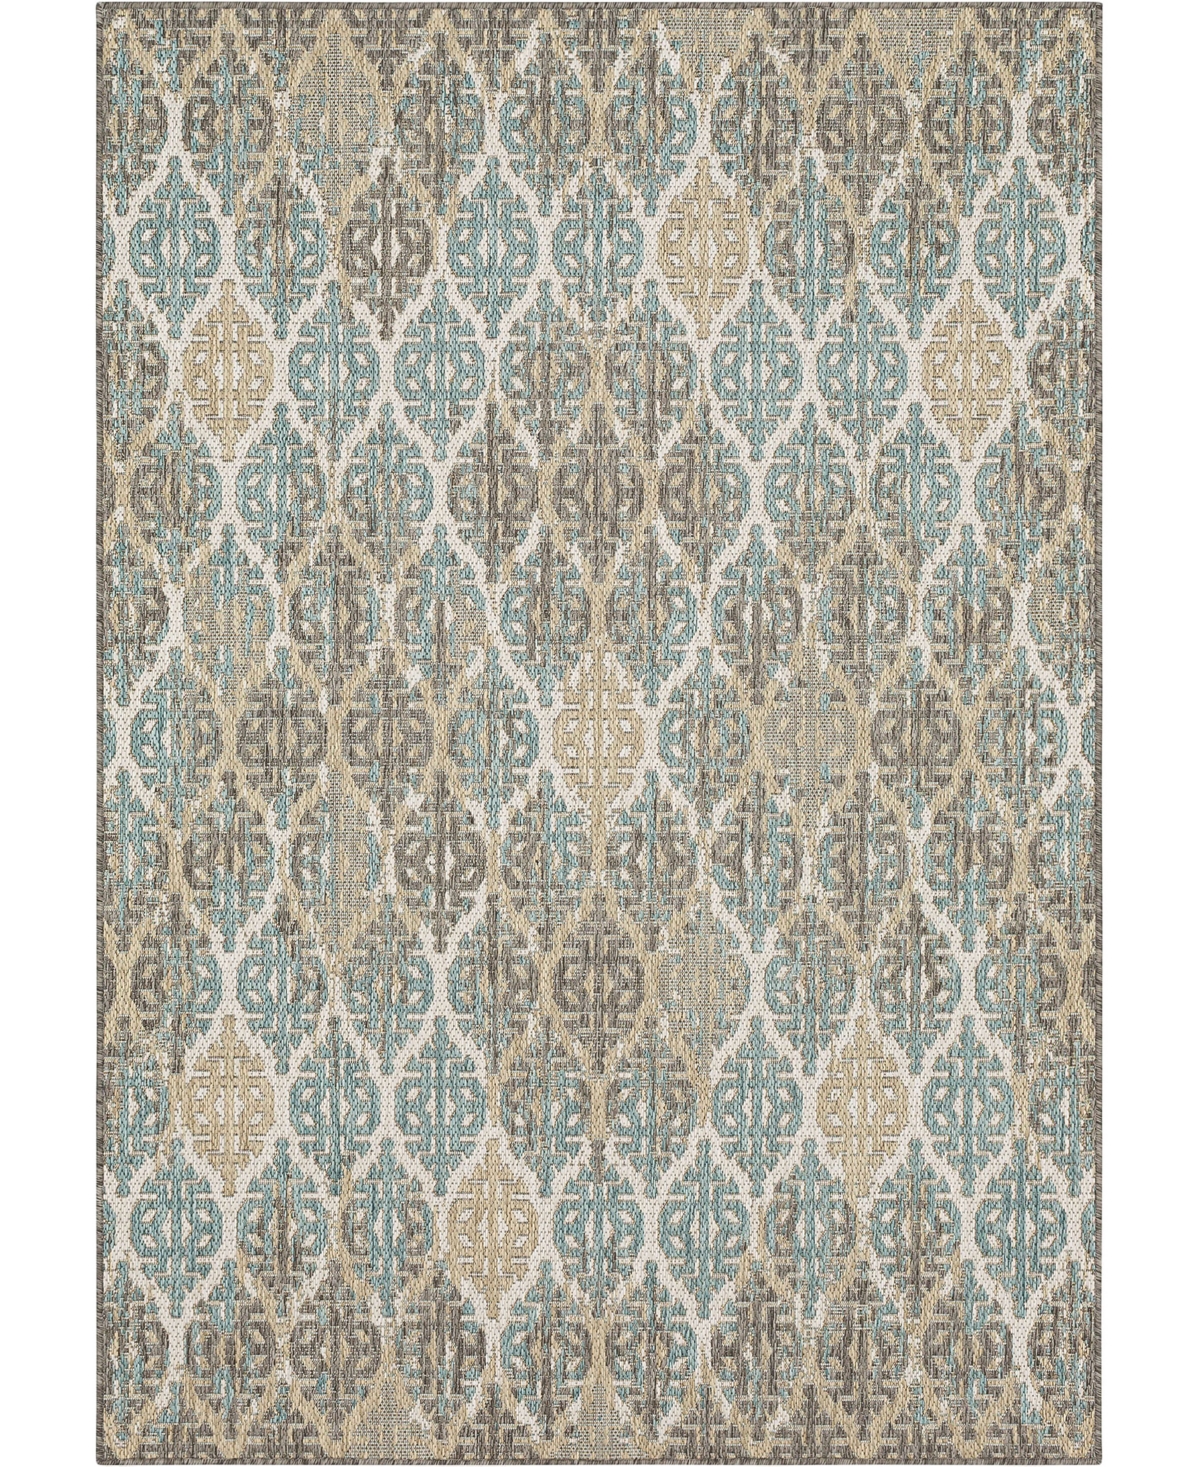 Mohawk Malibu Outdoor Stamped Ikat 8' X 10' Area Rug In Silver